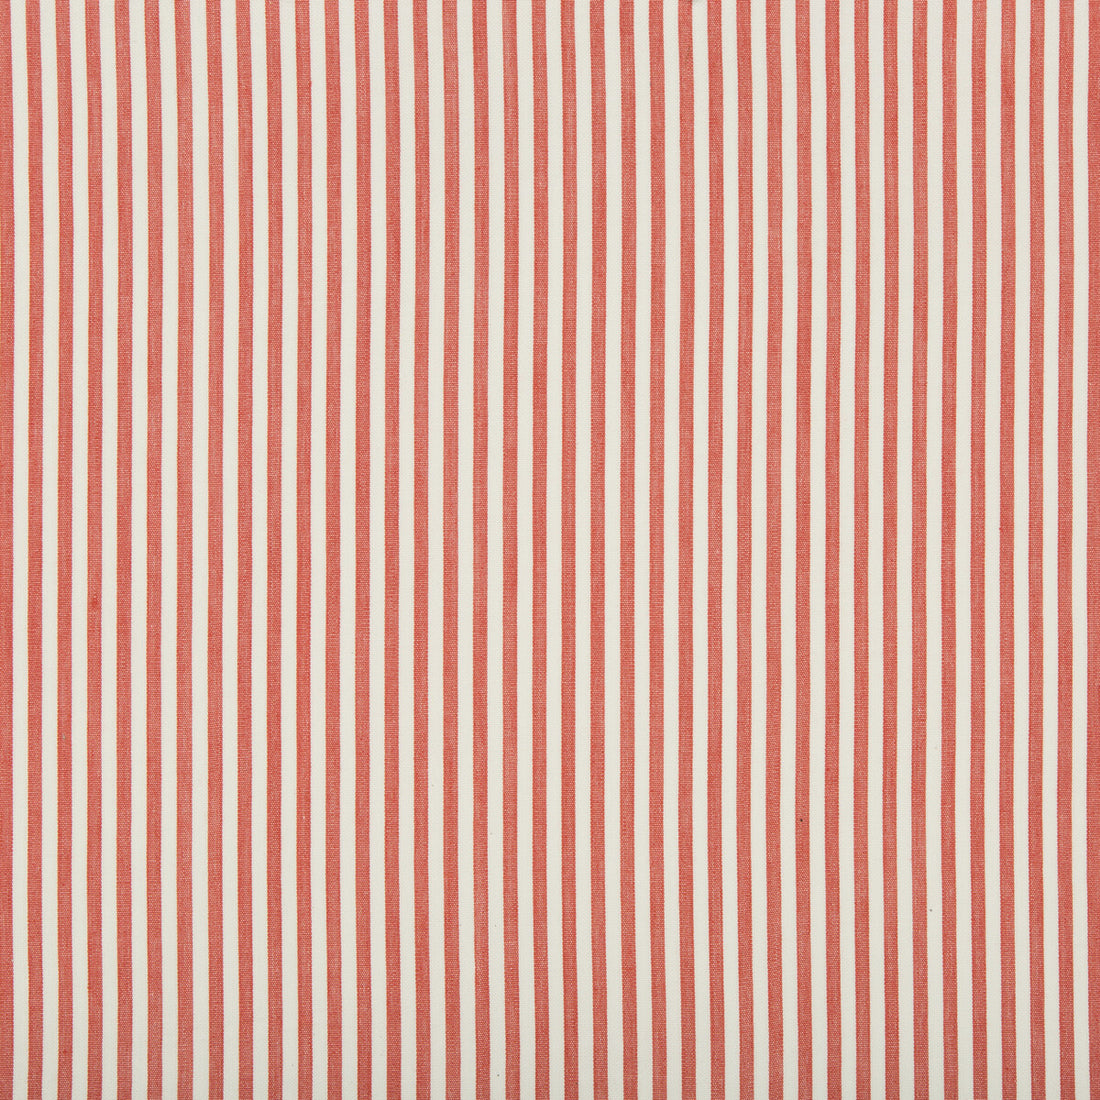 Cap Ferrat Stripe fabric in red color - pattern 2018146.119.0 - by Lee Jofa in the Suzanne Kasler The Riviera collection